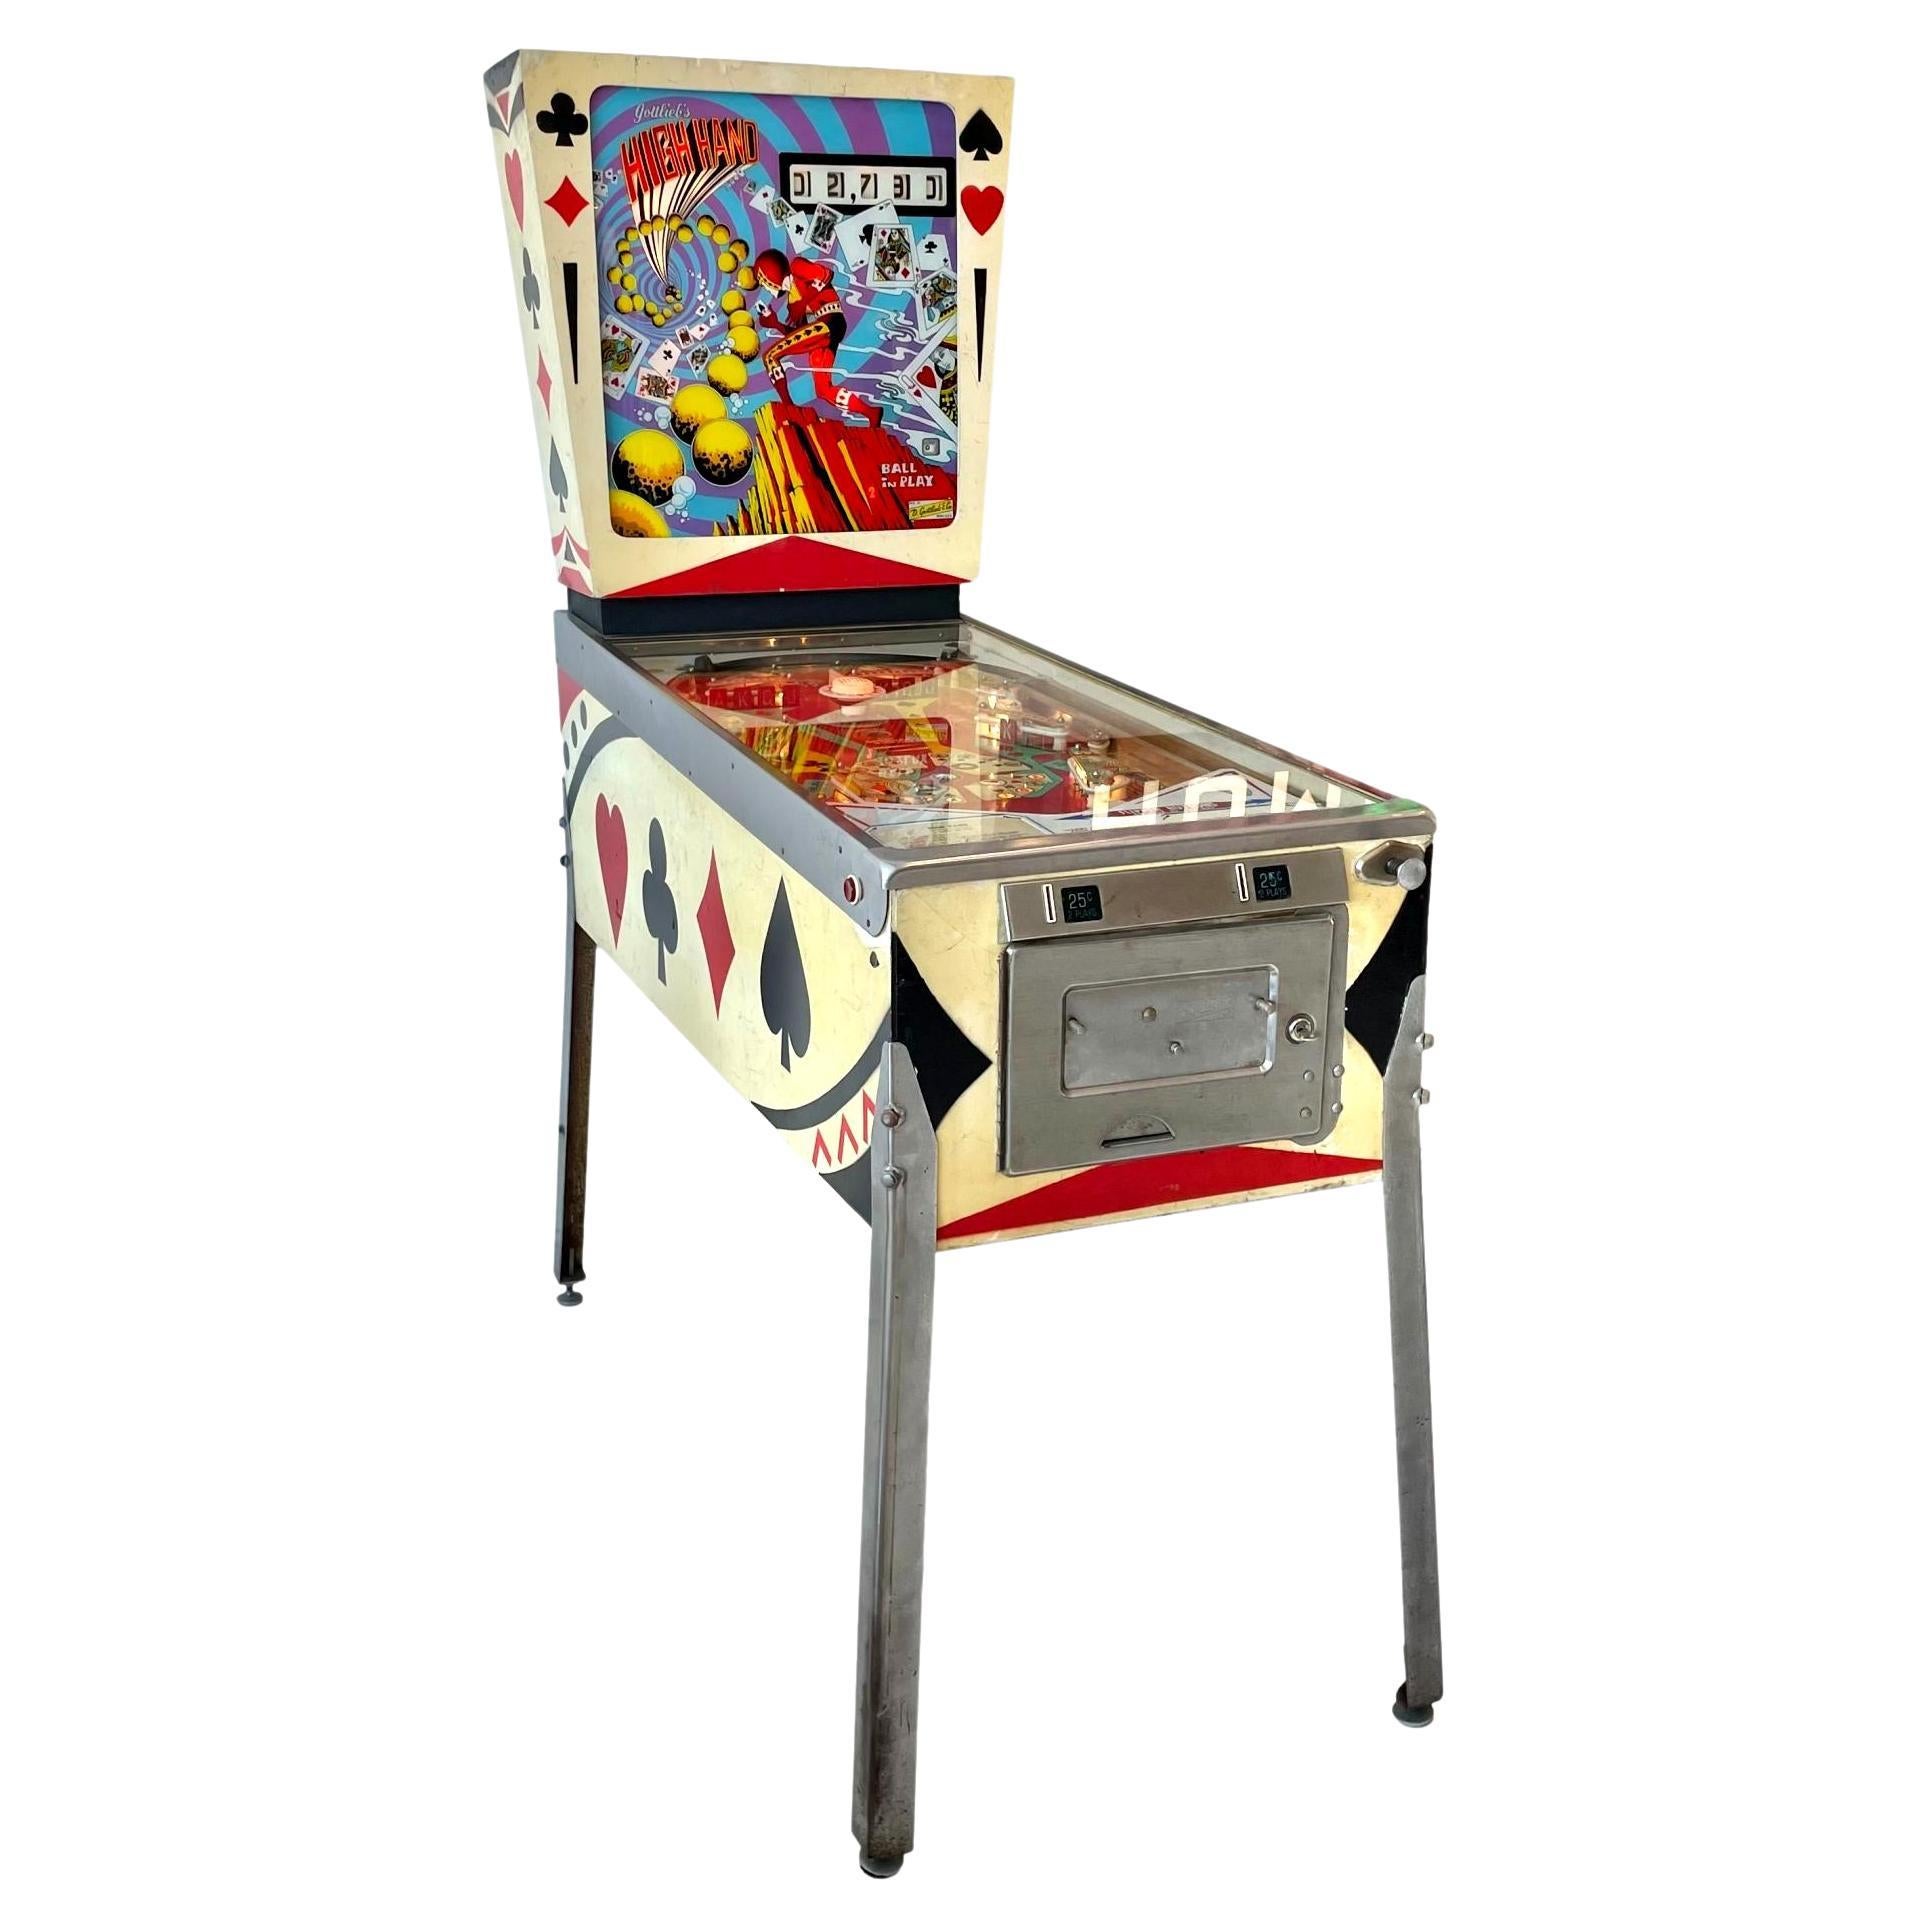 What are the most reliable pinball machines?